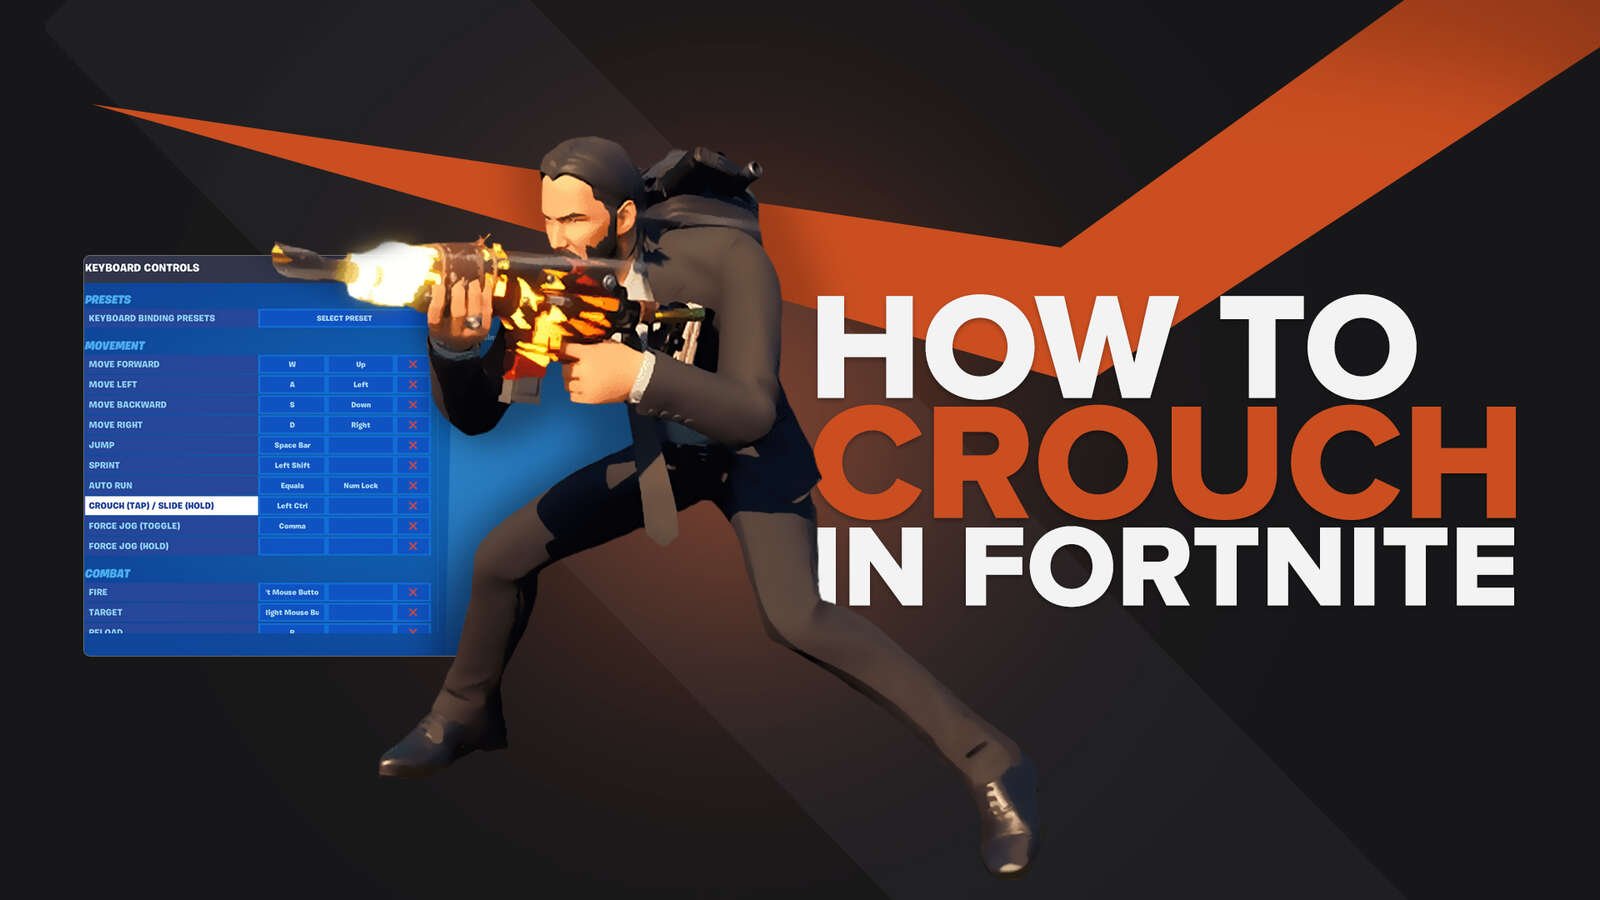 The Essential Crouching Guide For Fortnite